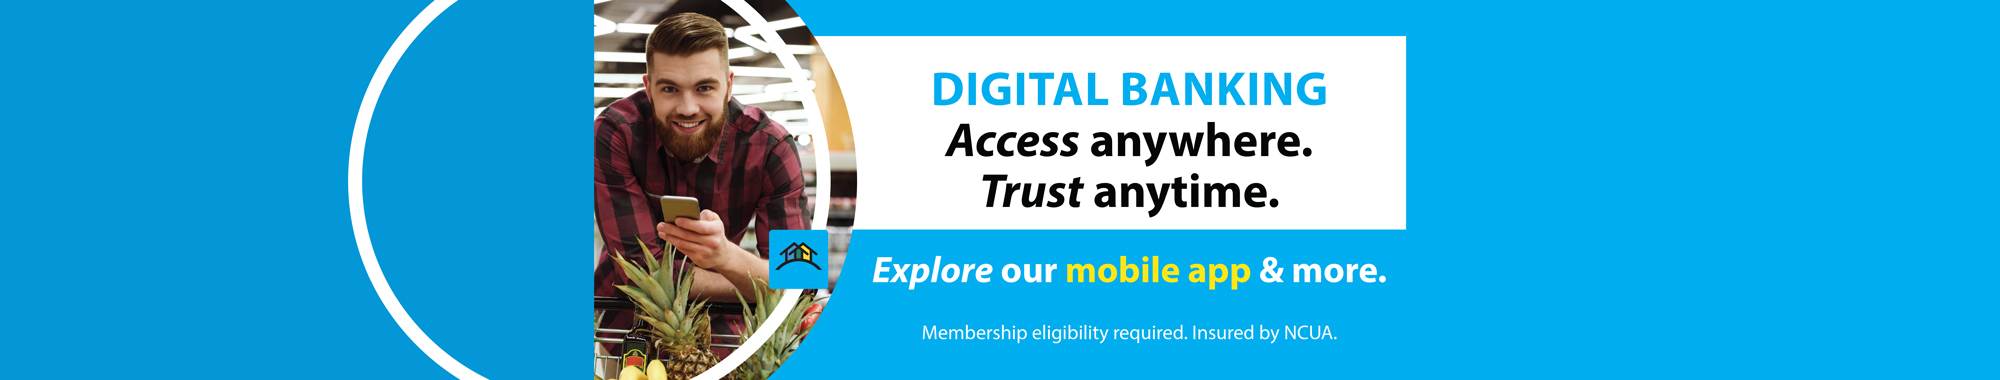 DIGITAL BANKING Access anywhere. Trust anytime. Explore our mobile app & more.